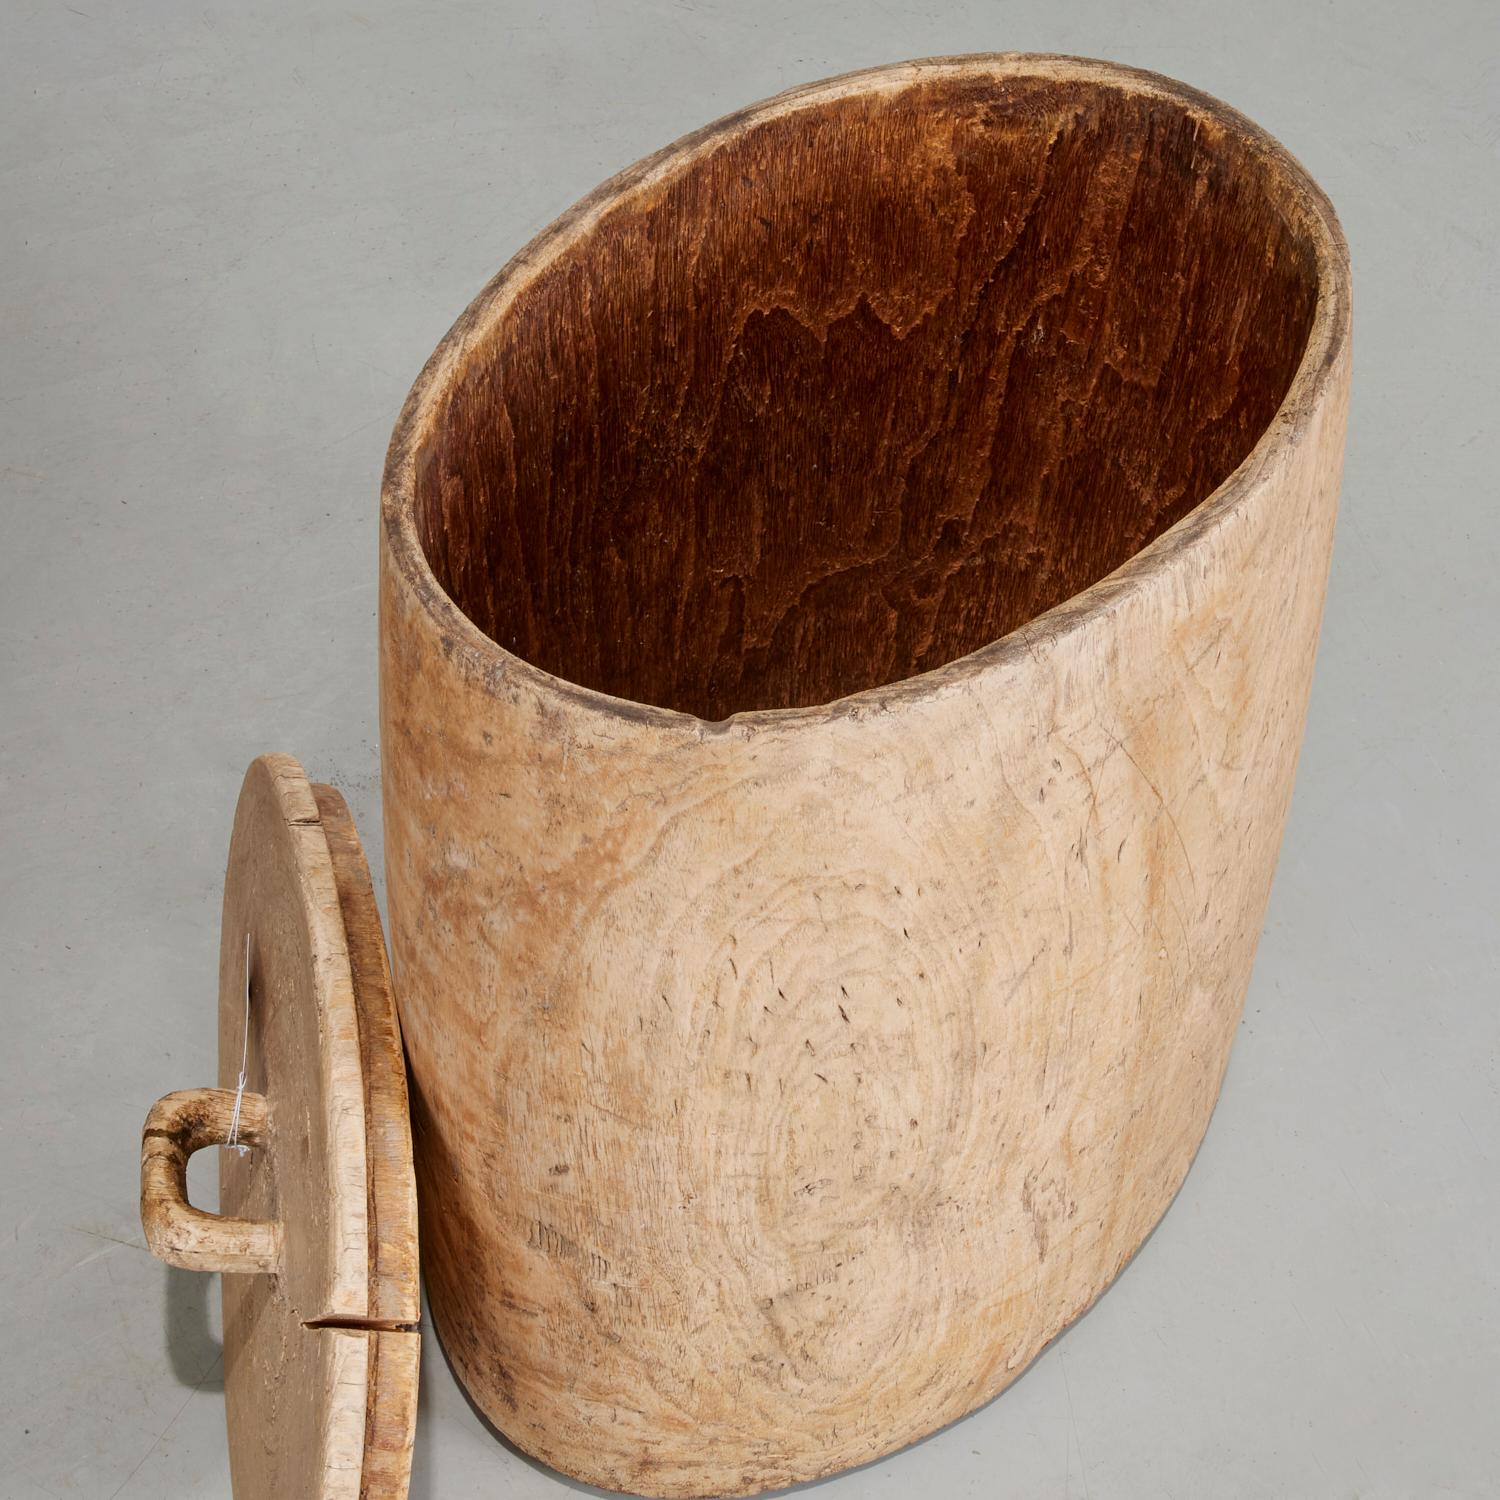 19th Century oval shaped lidded wooden rice container, likely Chinese. This is a hand hewn item made from a tree trunk and fitted with a base and lid made from the same wood. The lid is tight fitting and the handle shows evidence of long and